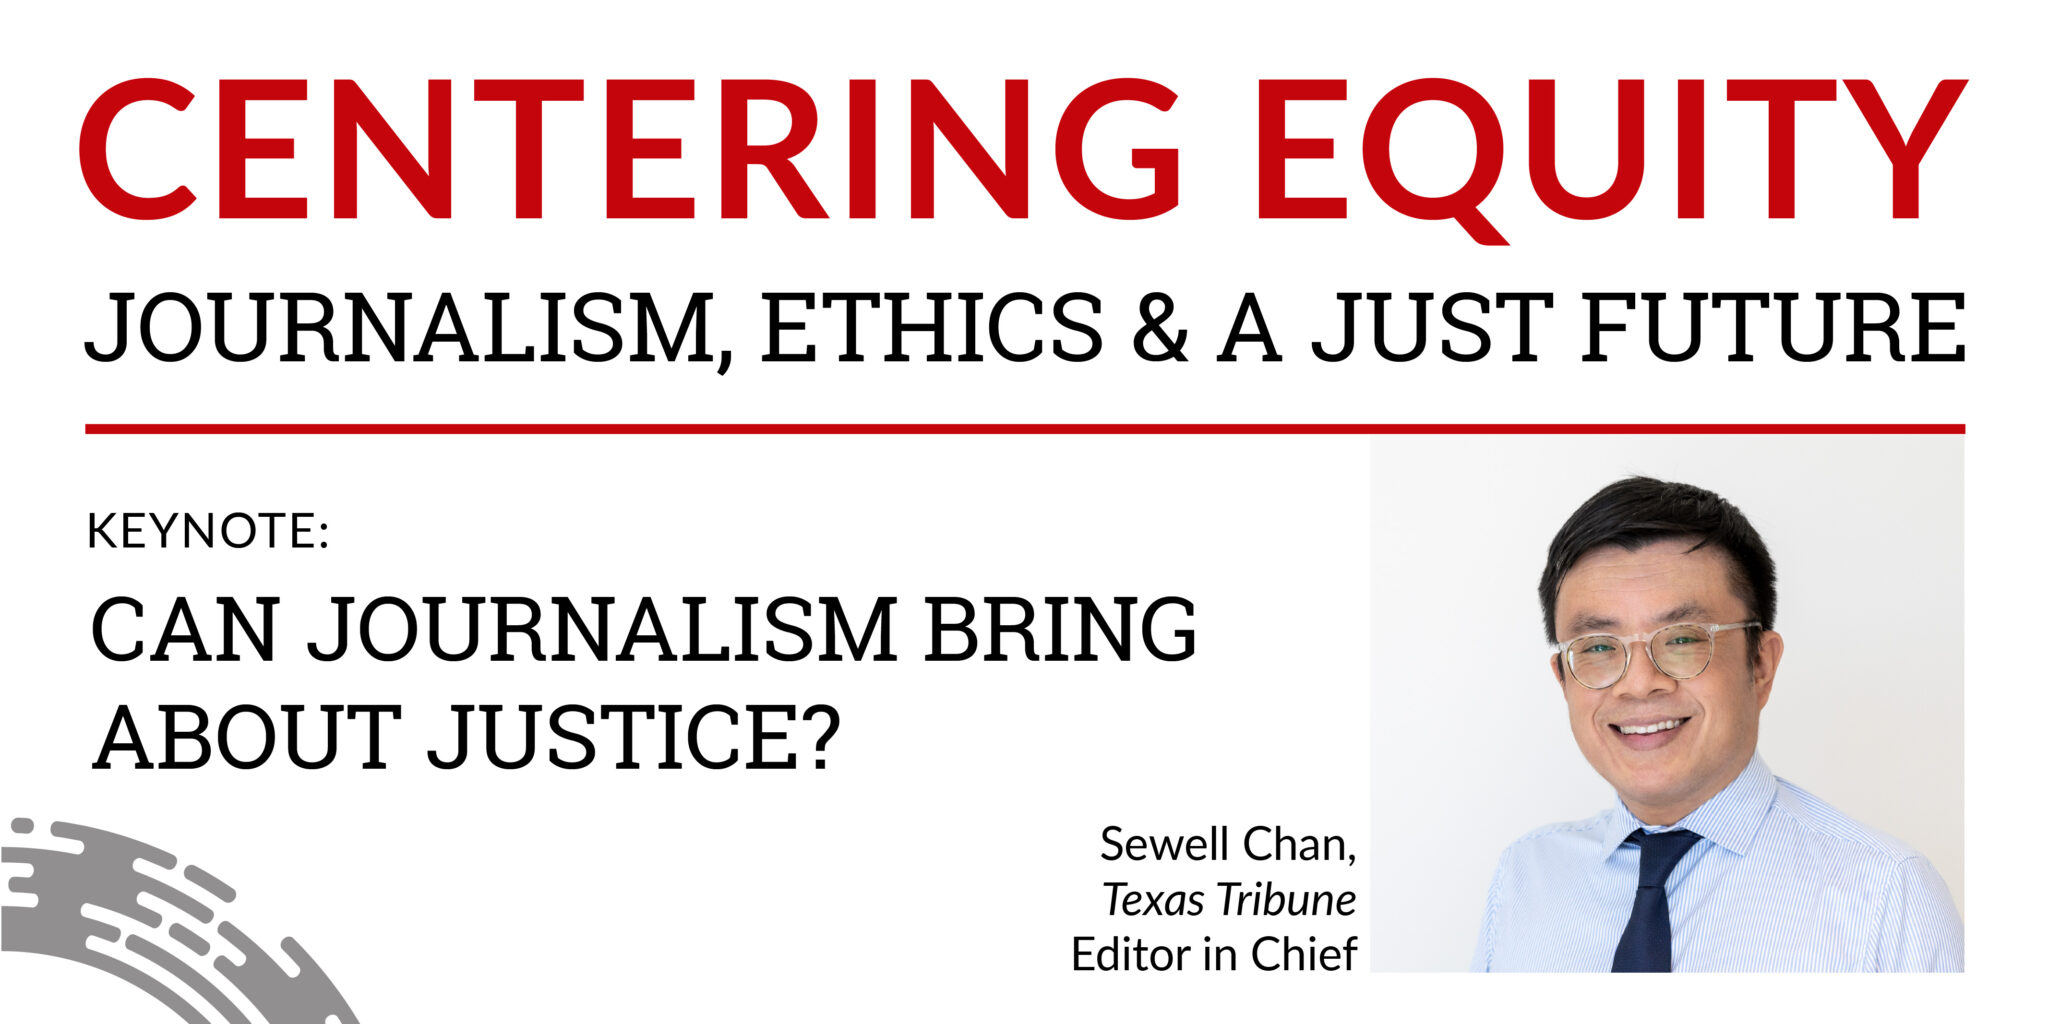 Keynote address from Sewell Chan: “Can journalism bring about justice?”